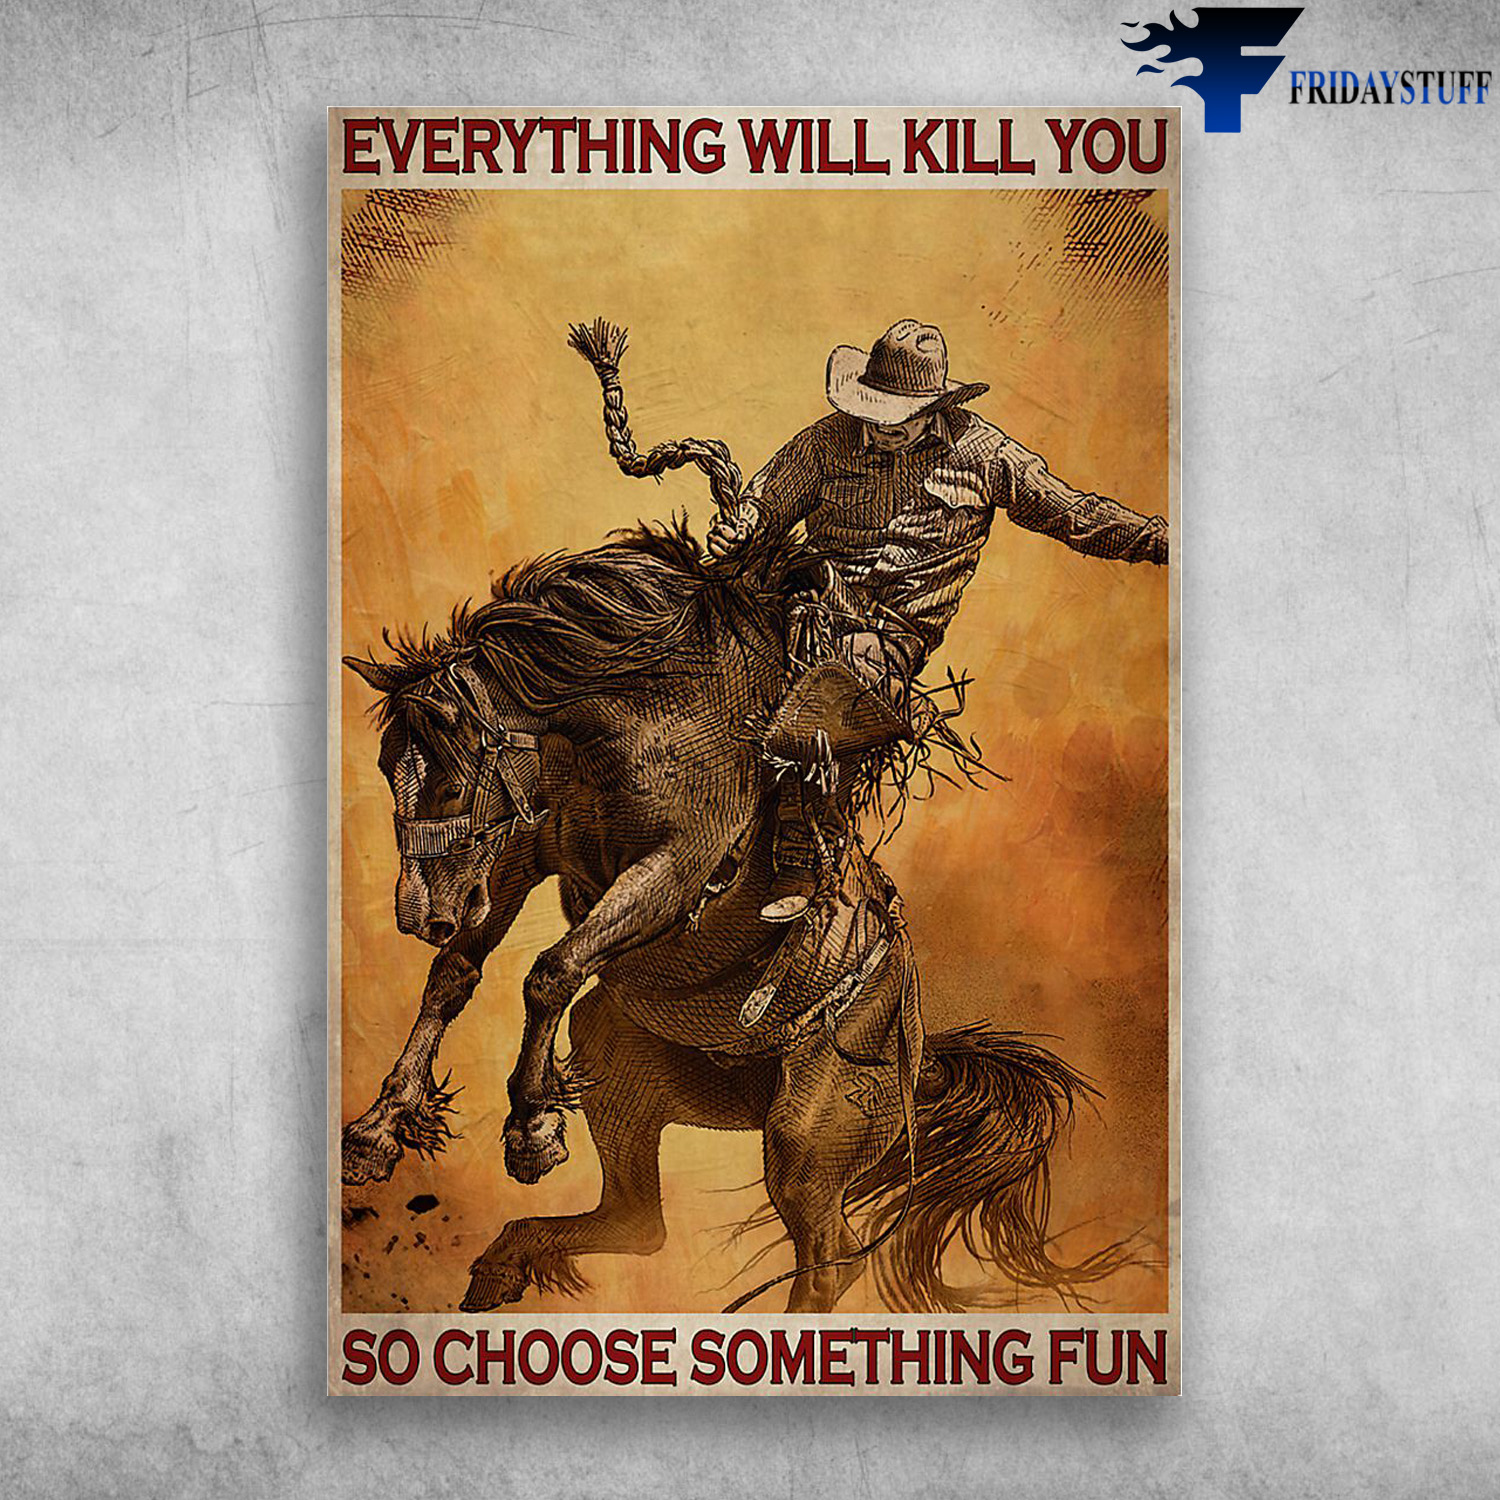 Man Riding The Horse - Everything Will Kill You So Choose Something Fun